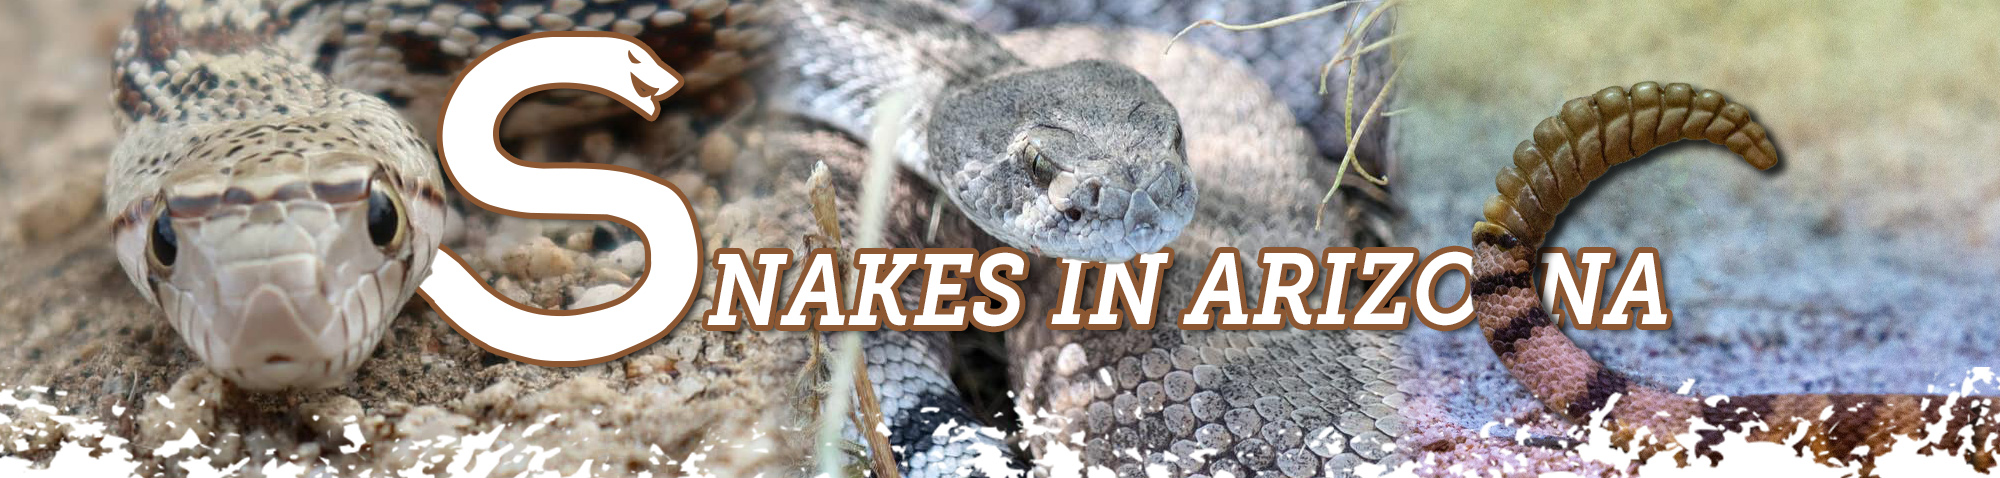 A collage of three photos—two of snake's heads and one of a rattlesnake's tail. Text over the photo reads "Snakes in Arizona."